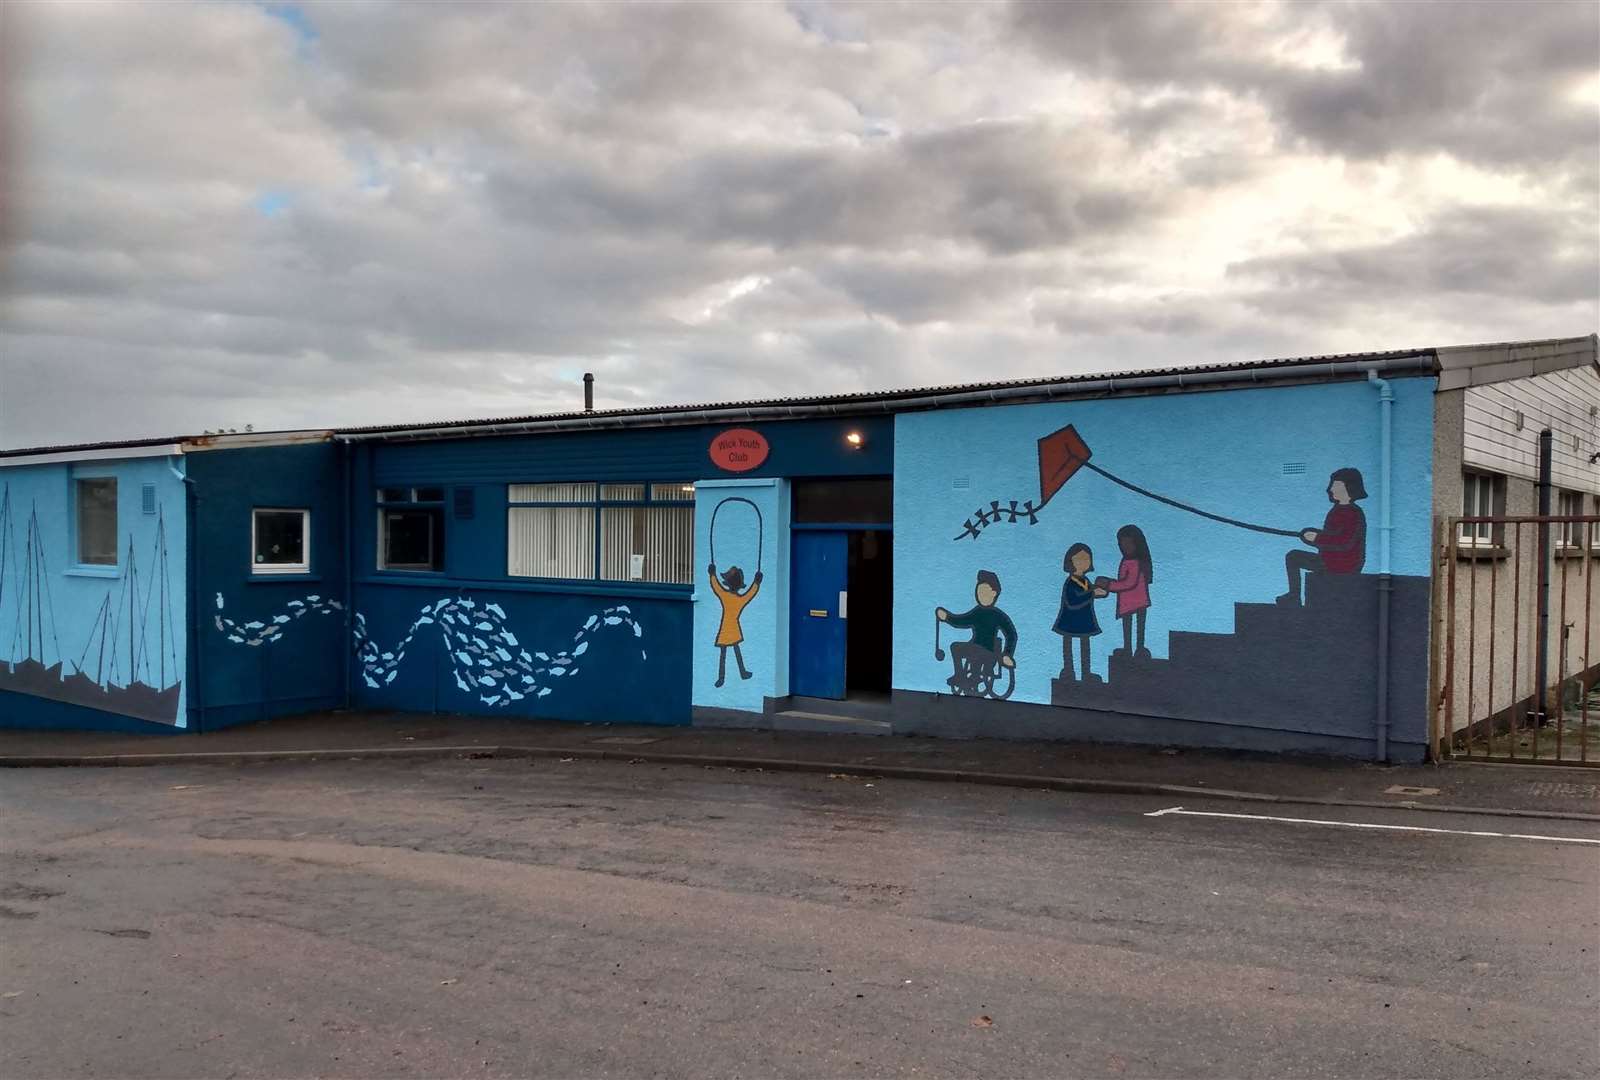 The 80-year-old building operated as Wick Youth Club will be given a facelift thanks to a £50,000 loan for Wick Community Hub.